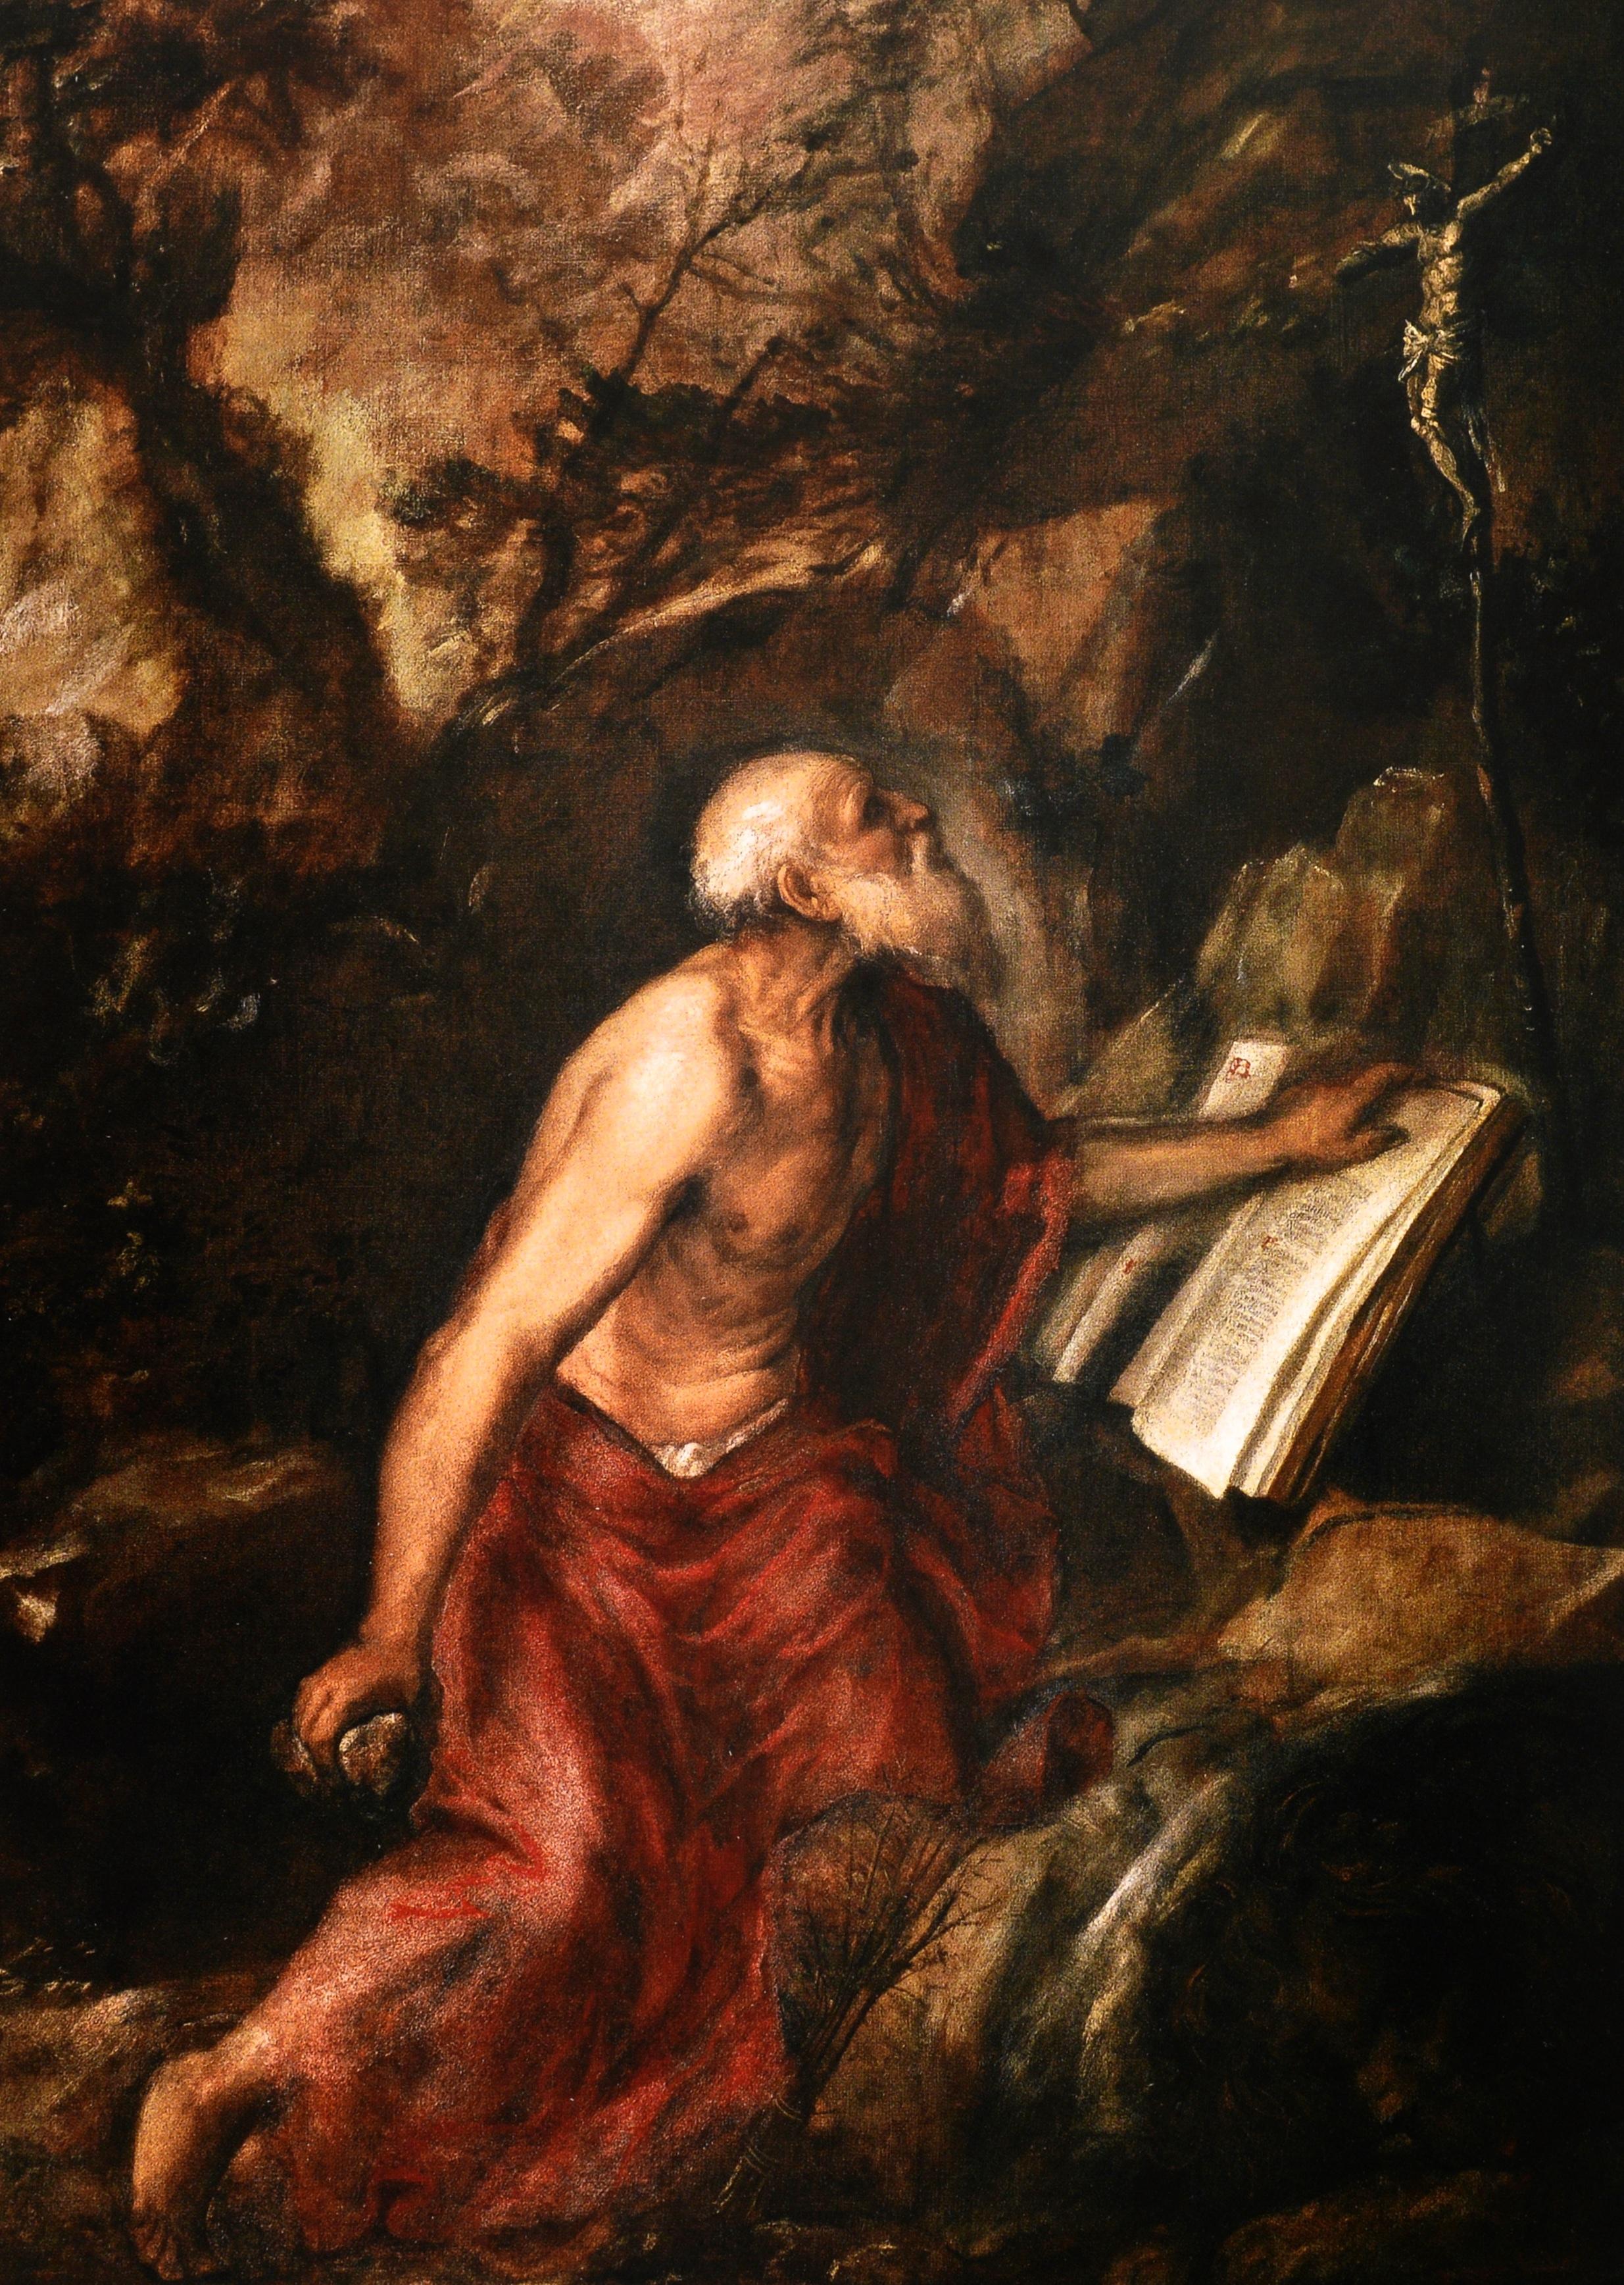 Contemporary Titian, Tintoretto, Veronese Rivals in Renaissance Venice, Stated 1st Ed For Sale